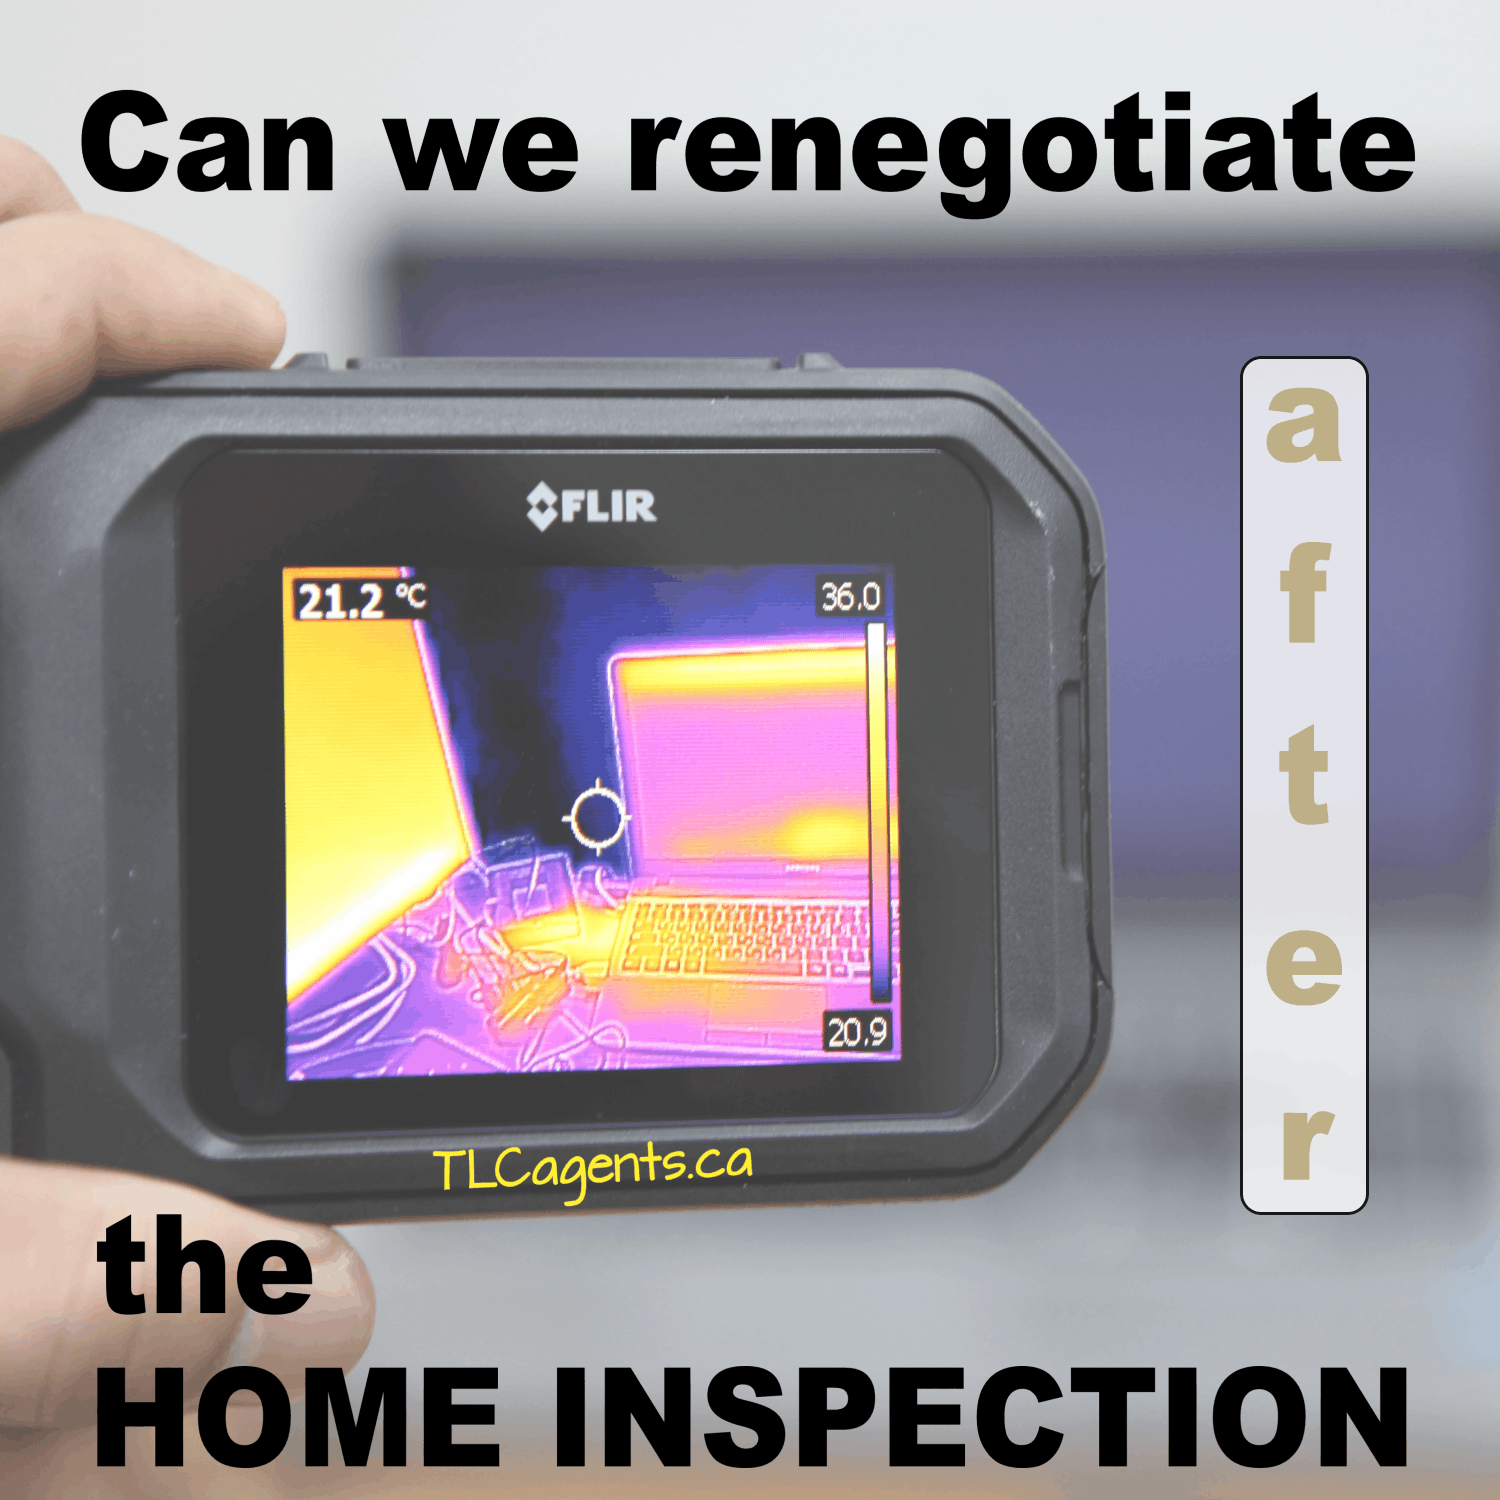 Renegotiate after home inspection